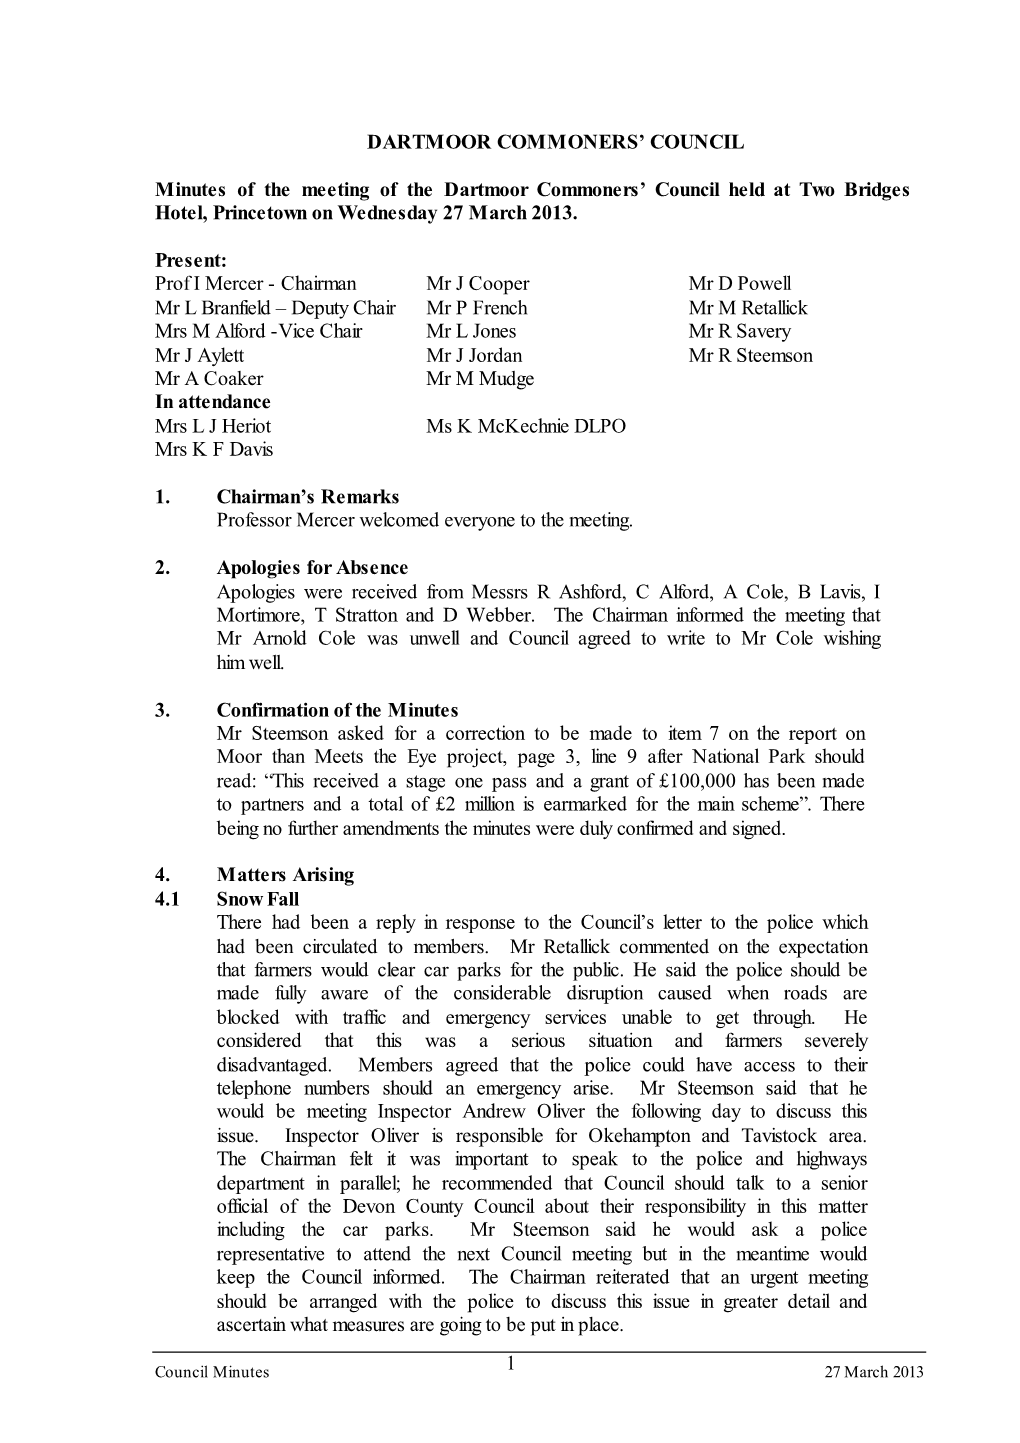 Council Minutes 1 27 March 2013